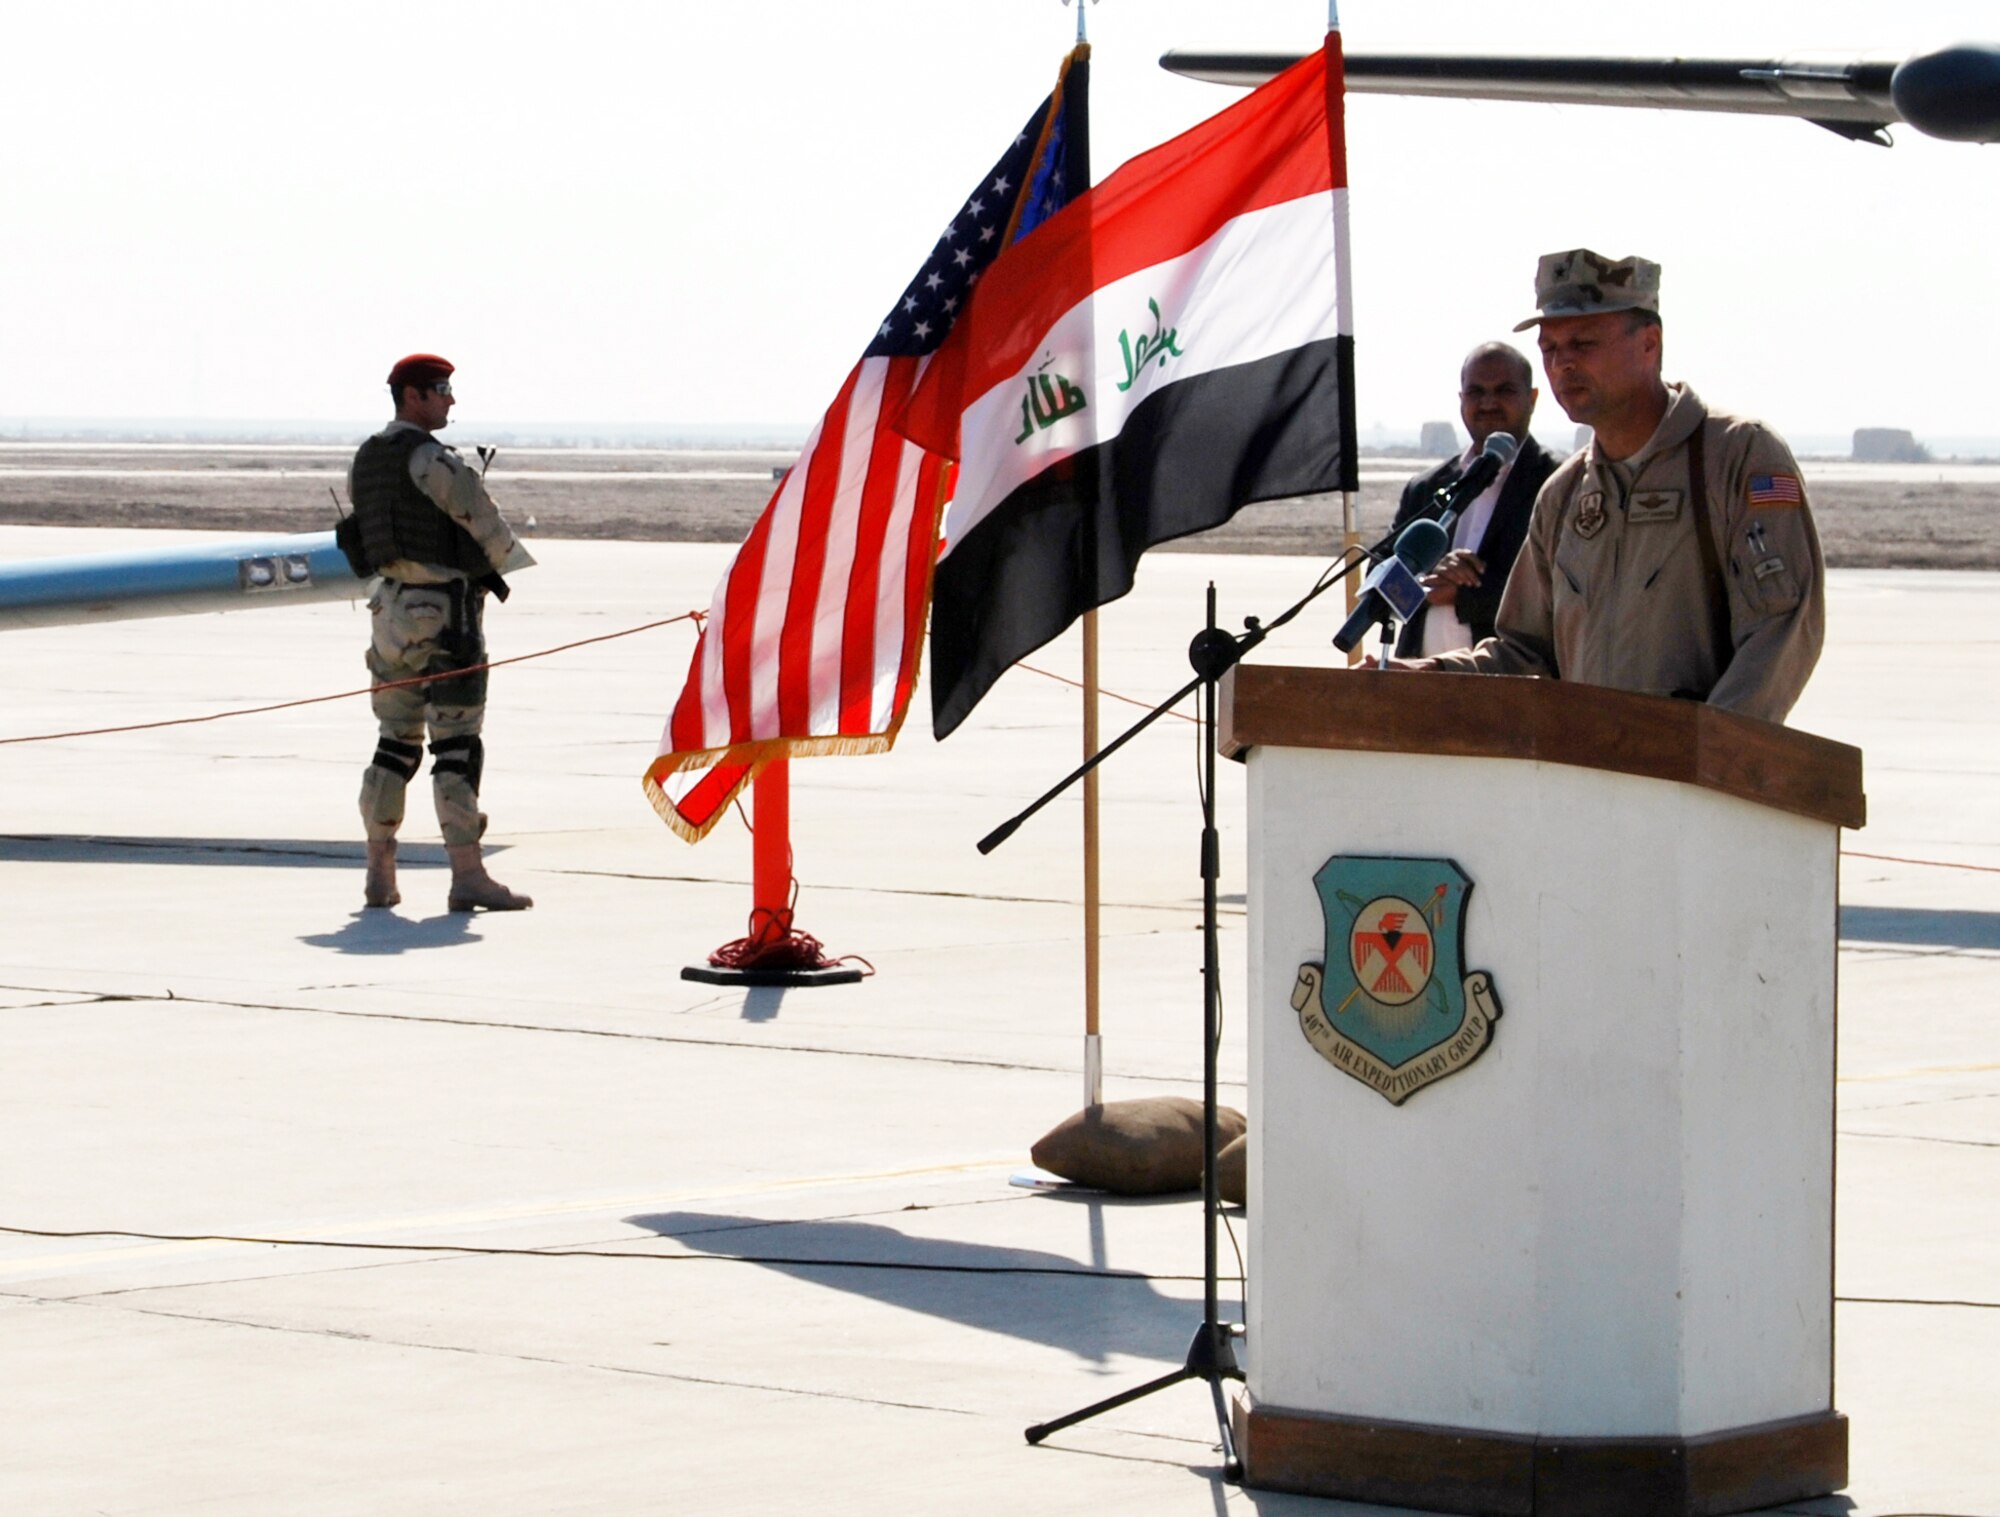 Brig. Gen. Scott Hanson, Commander of the 321st Air Expeditionary Wing and Director of Iraqi Training and Advisory Mission –  Air Force addresses audience members gatherd at Ali Air Base, Iraq, during a ceremony celebrating the arrival of the Iraqi Air Force's Squadron 70 and the grand opening of their new dining facility.  Squadron 70 moved to Ali Base Oct. 17 from Basra. Since the move, Squadron 70 has provided surveillance and reconnaissance support of the Hajj, provided ISR support for Iraqi Security Forces and secured Iraqi’s vital infrastructure and borders.(U.S. Air Force photo by Staff Sgt. Eric Donner)